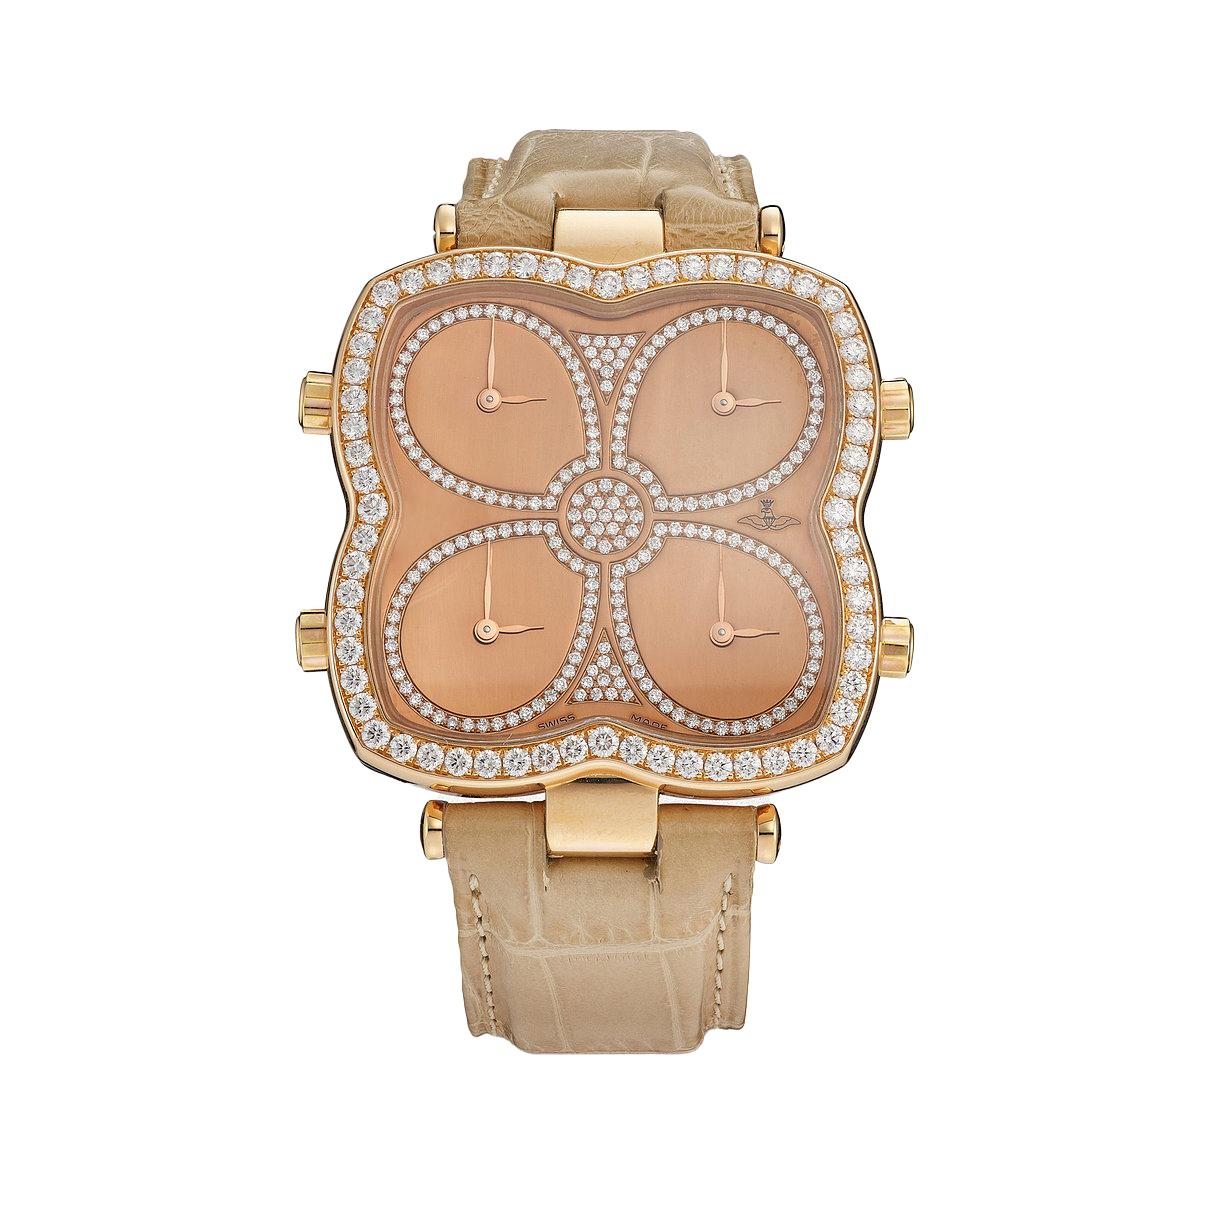 Watch in pink gold 18kt set with 253 diamonds 2.97 cts on bezel and dial with 4 time zones, prong buckle alligator strap quartz movement.  

We do not guarantee the functioning of this watch.